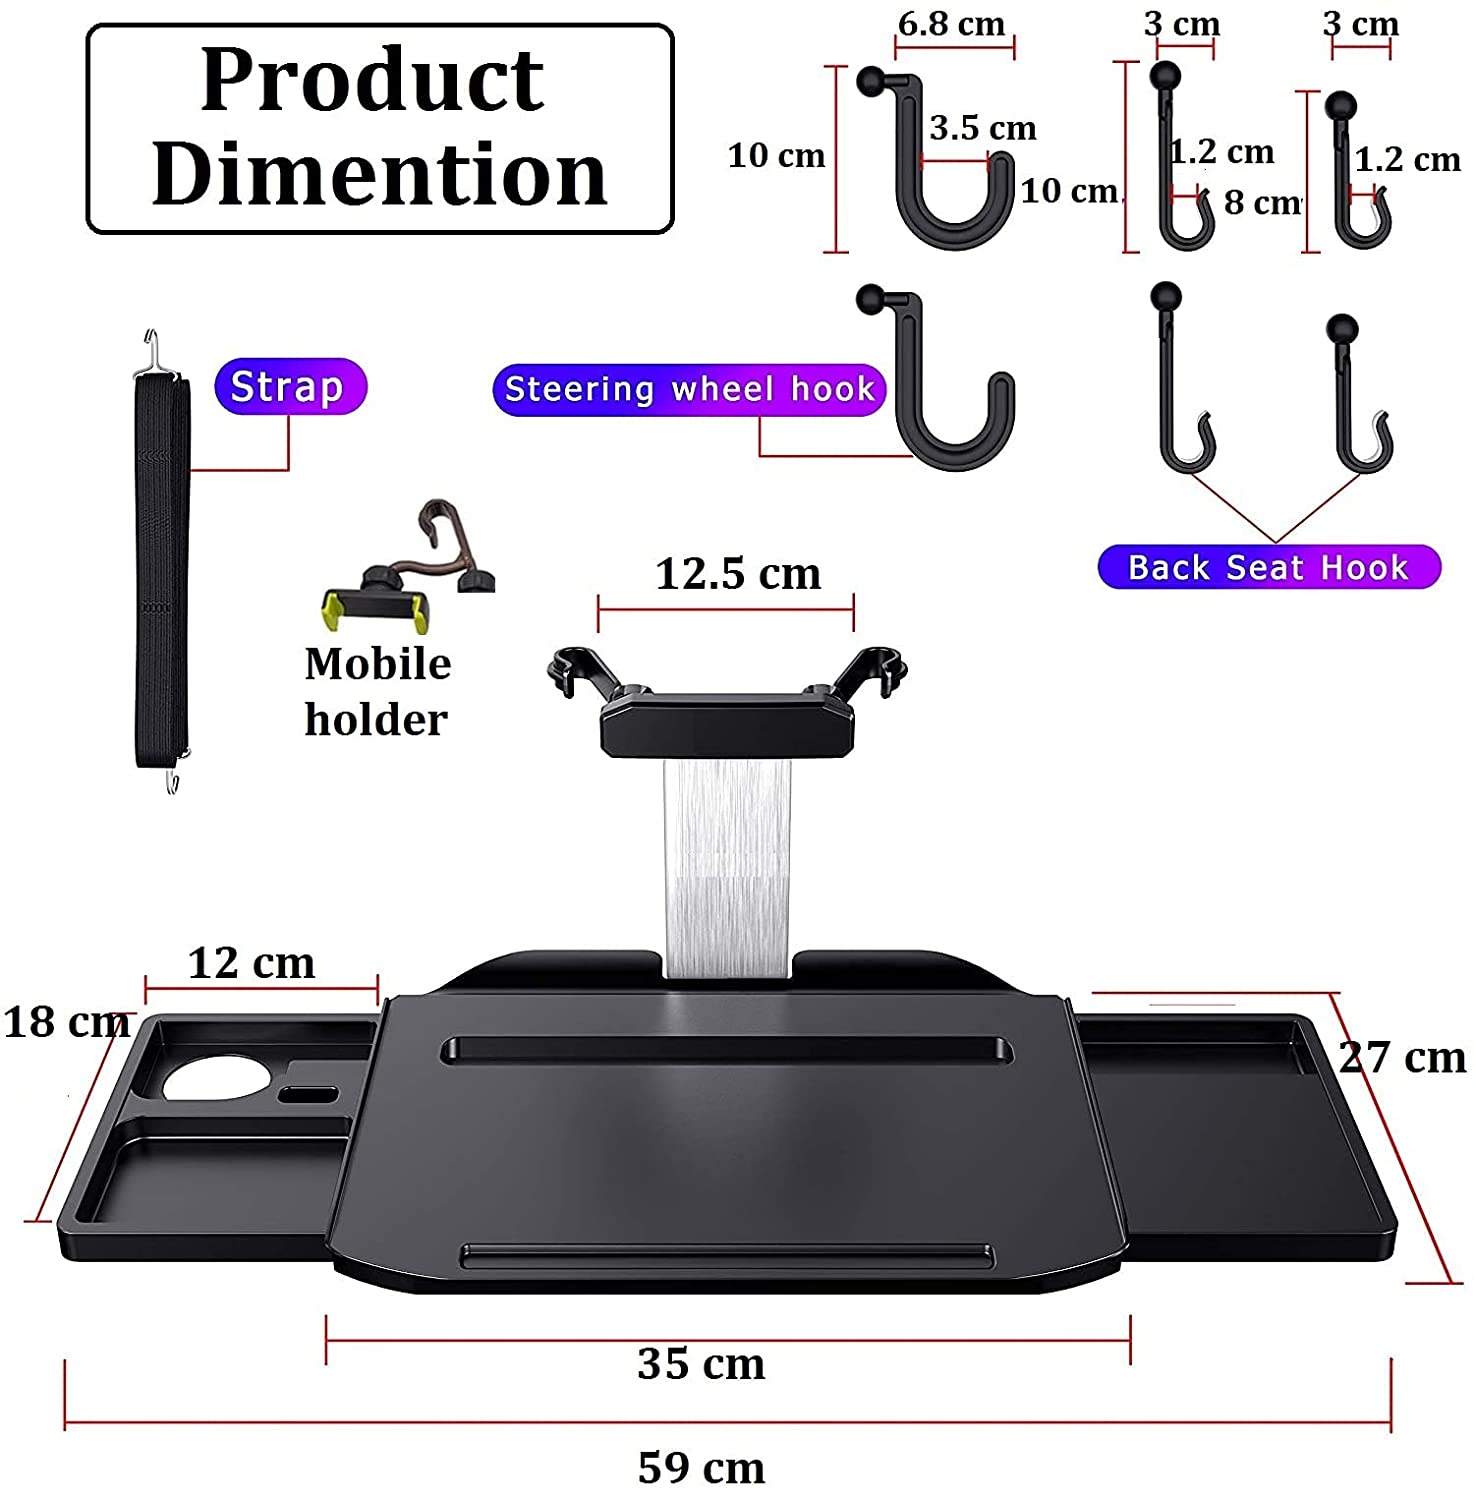 Car Tray Back seat, Retractable Foldable Notebook Laptop Stand Holder Upto 10 kg, Food Drink Mount Interior Backseat/Steering Organizer